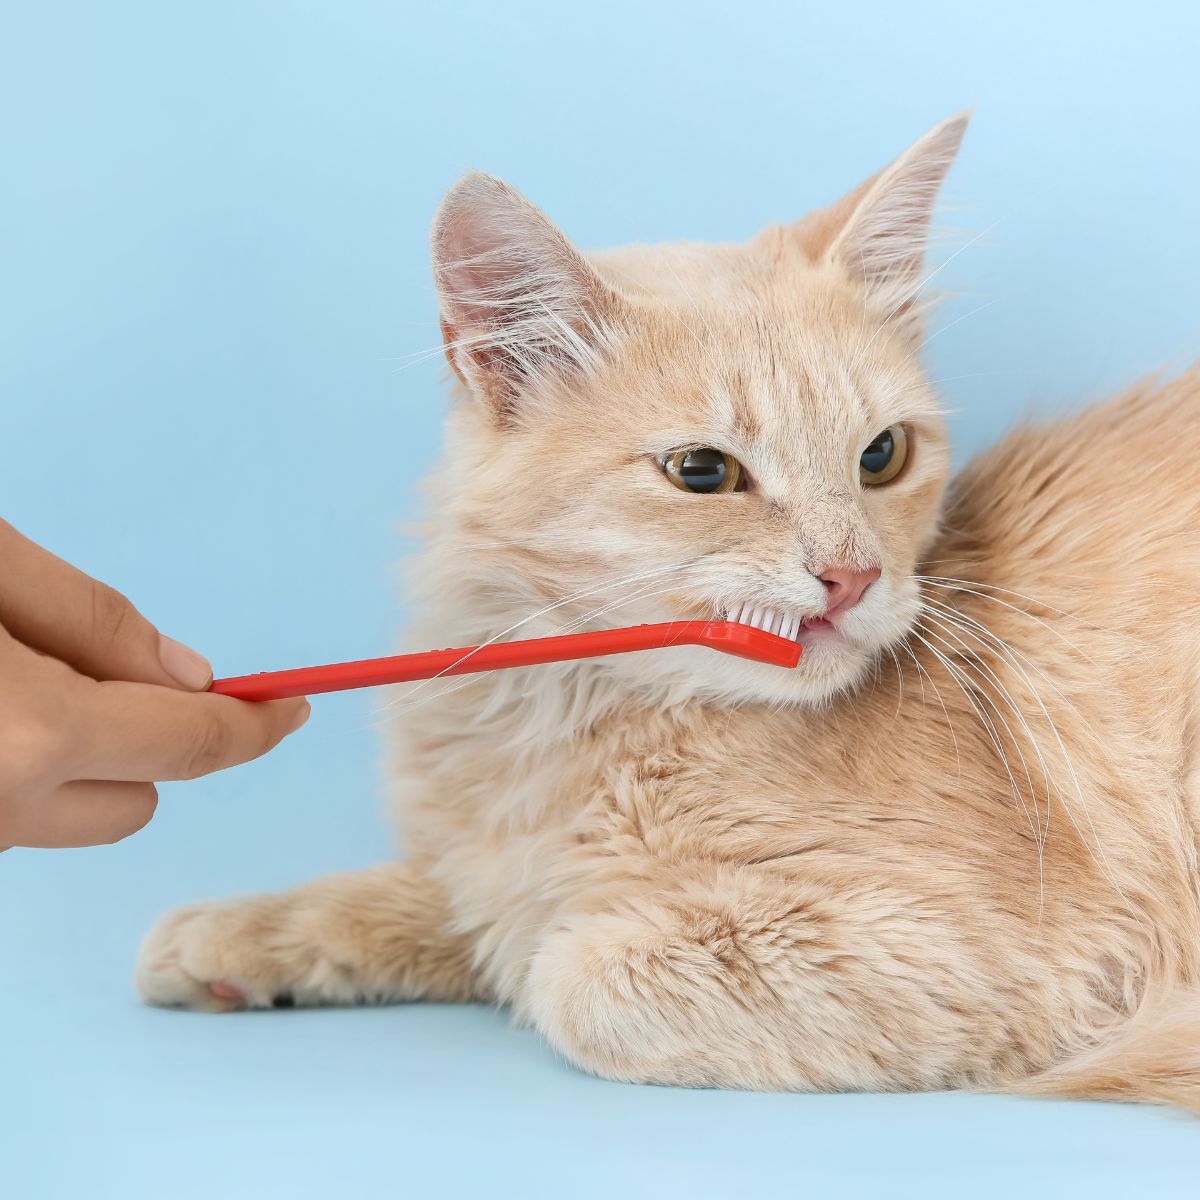 cat and toothbrush